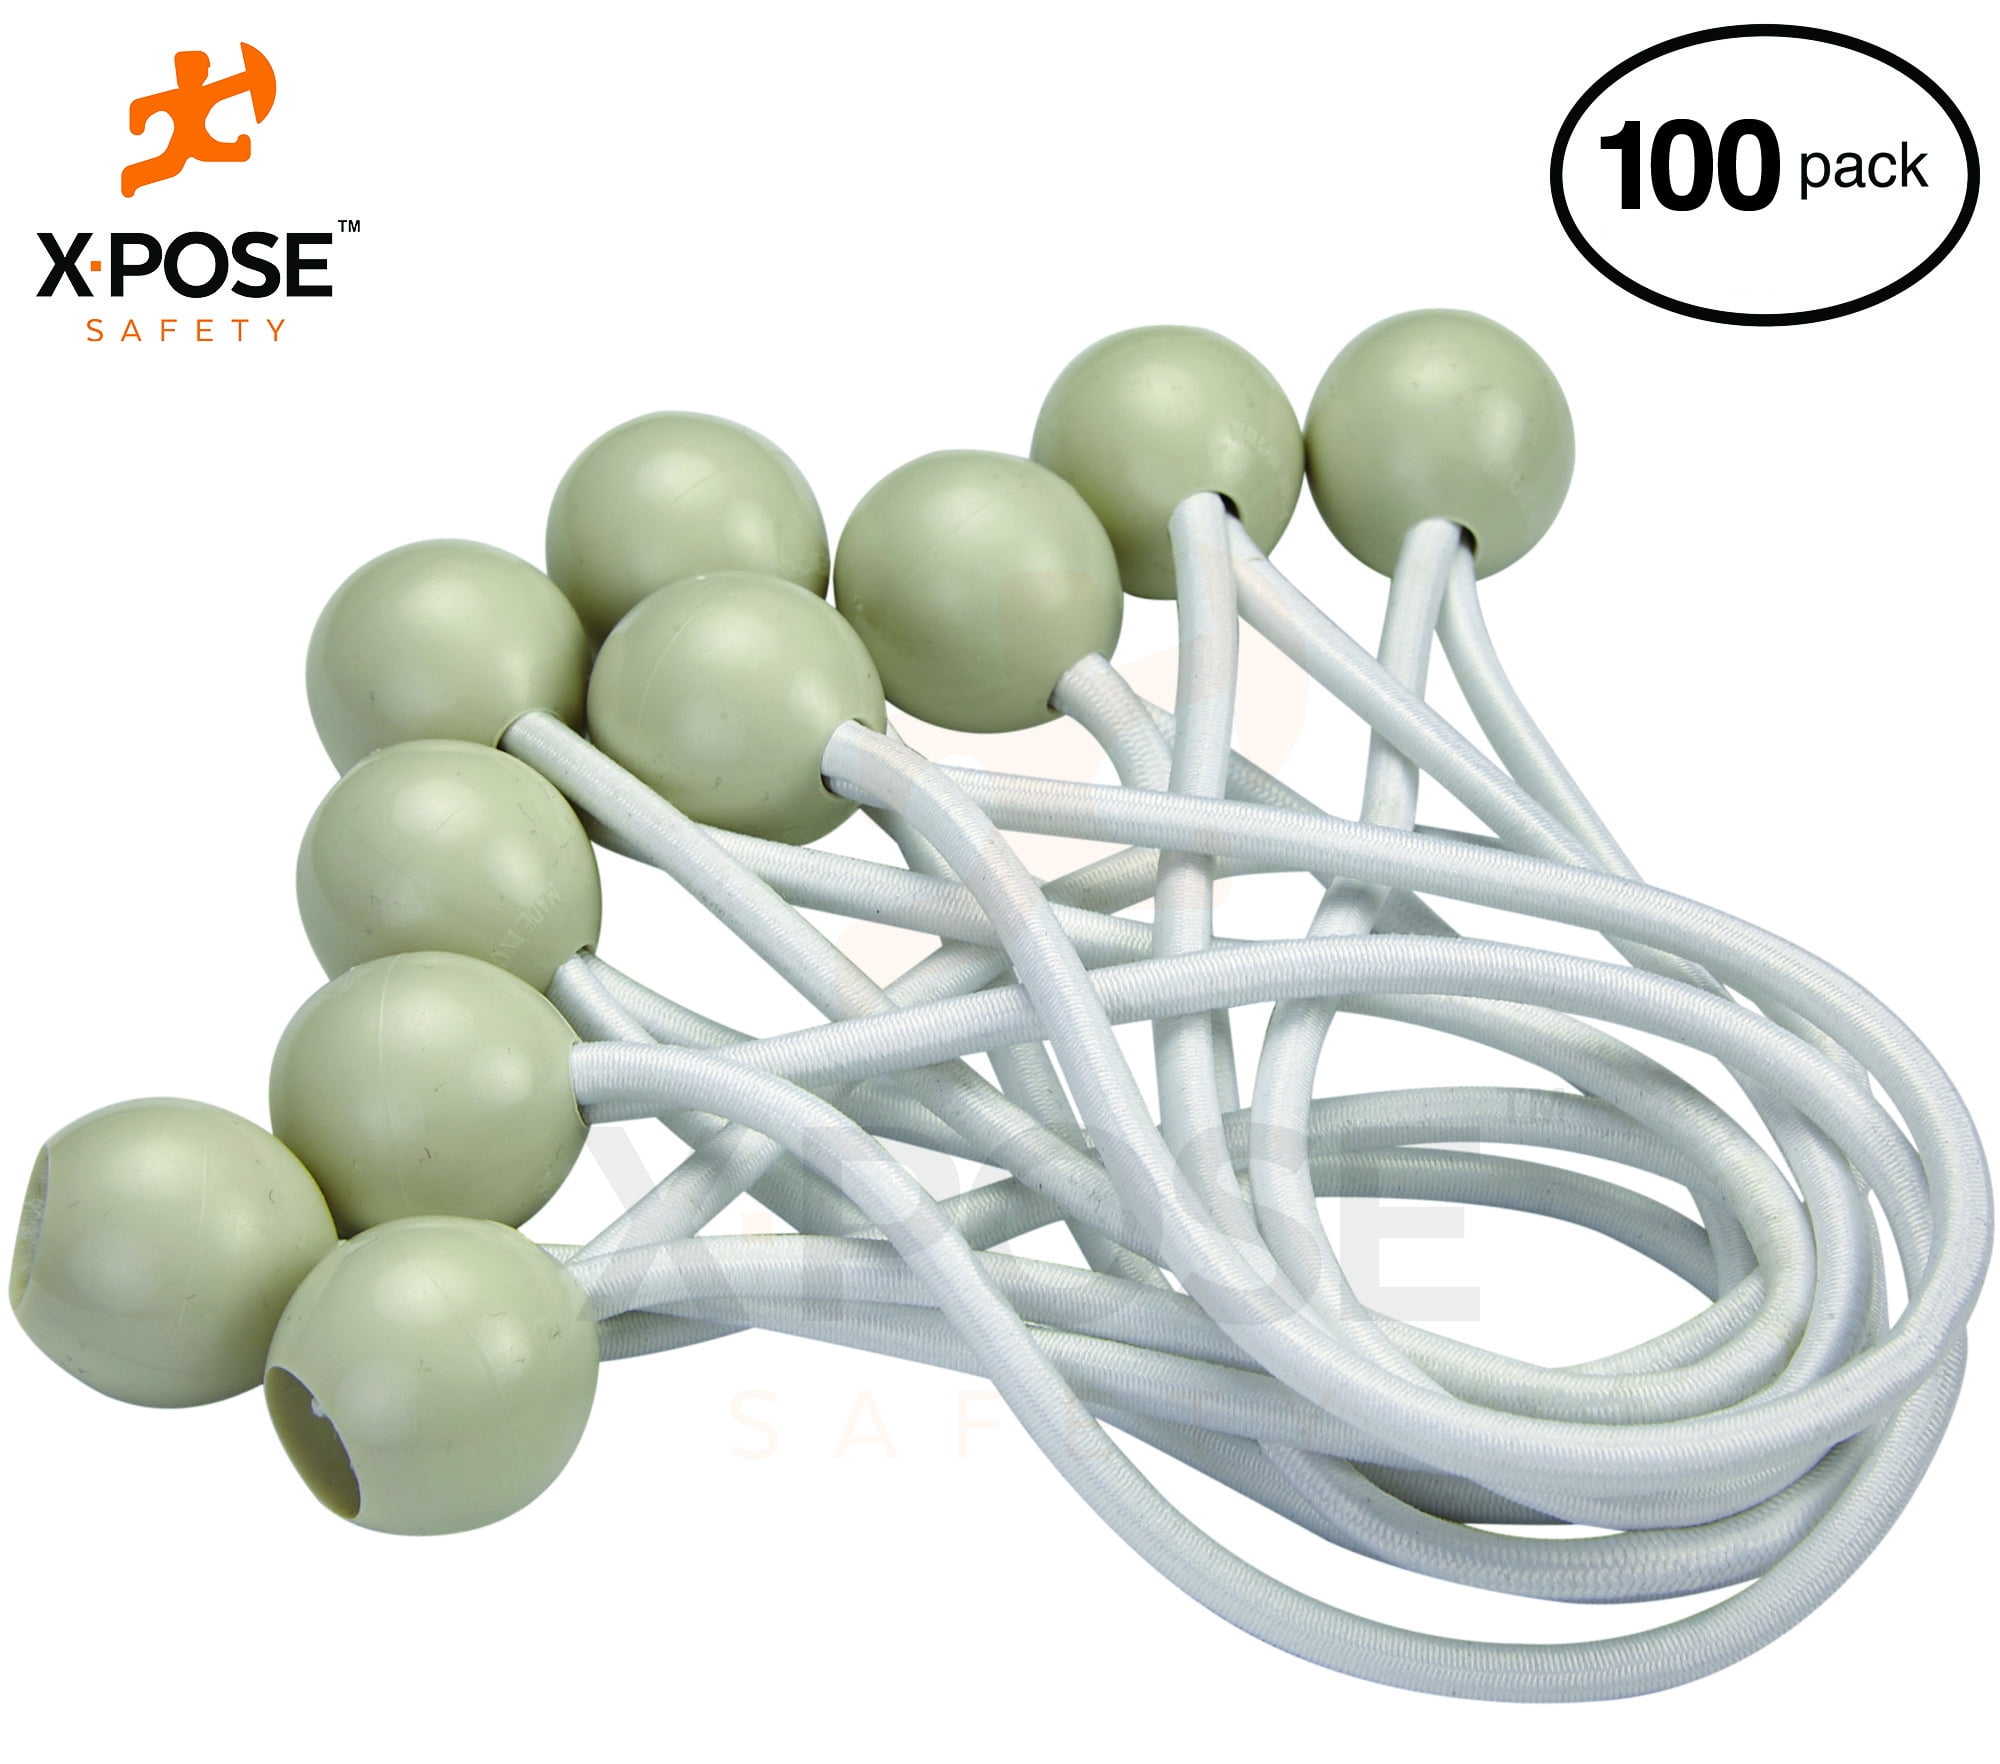 Tarps Xpose Safety Bungee Ball Cords Cable Organization 9” 100 Pack Walls Heavy Duty White Stretch Rope with Ball Ties for Canopies 